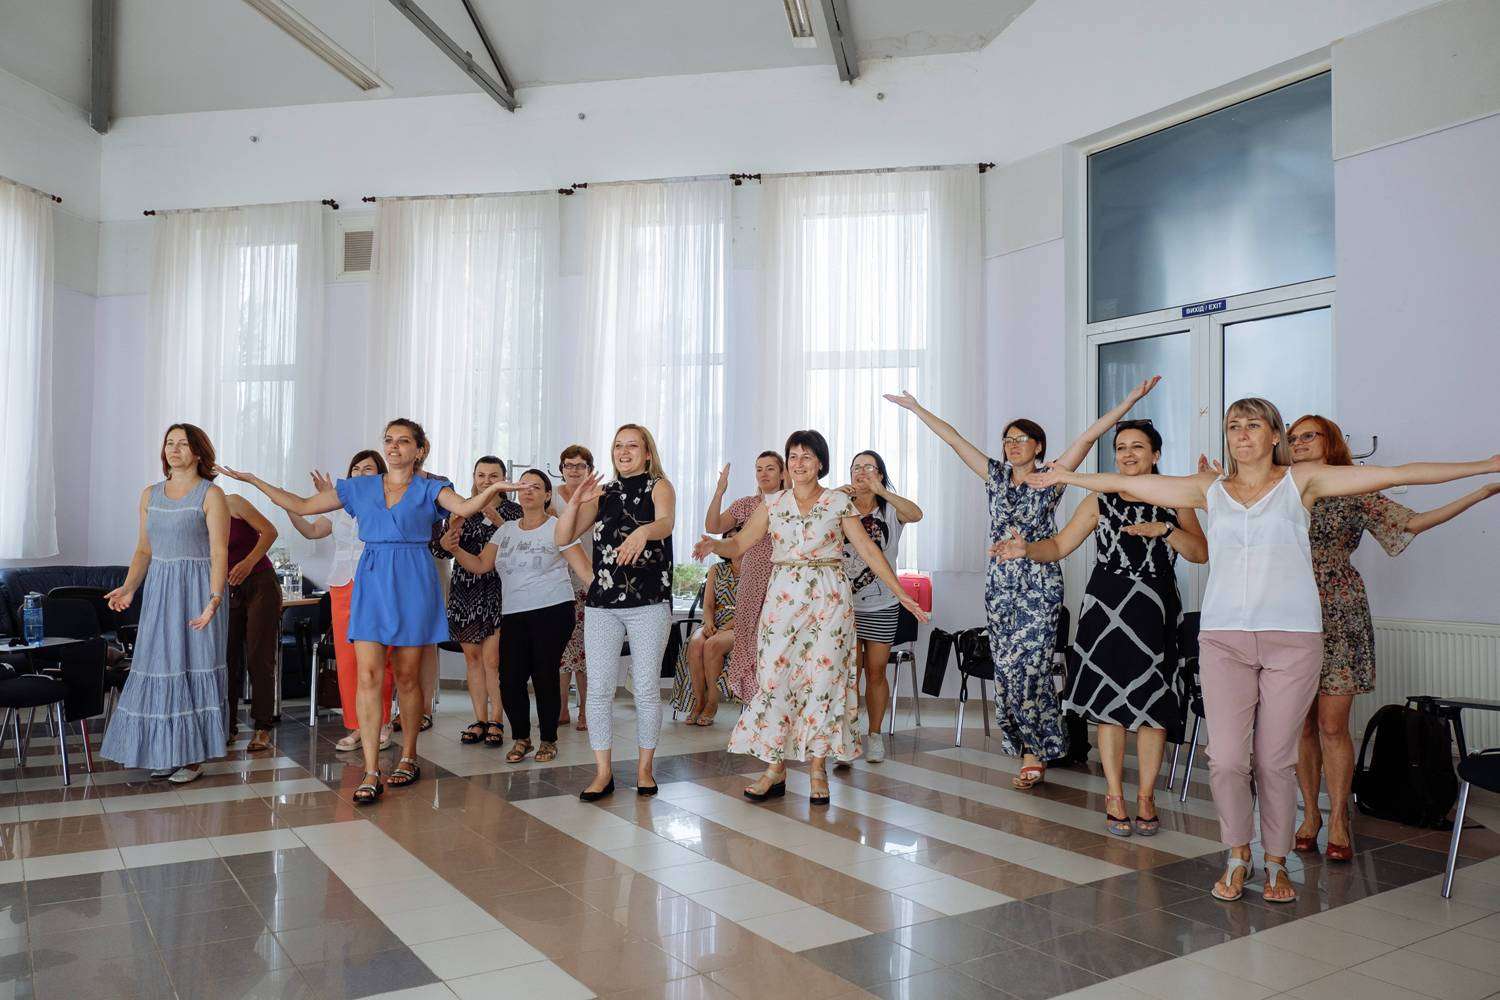 CAMZ became a co-organiser of the first summer school "Resource Mother" in Zakarpattia